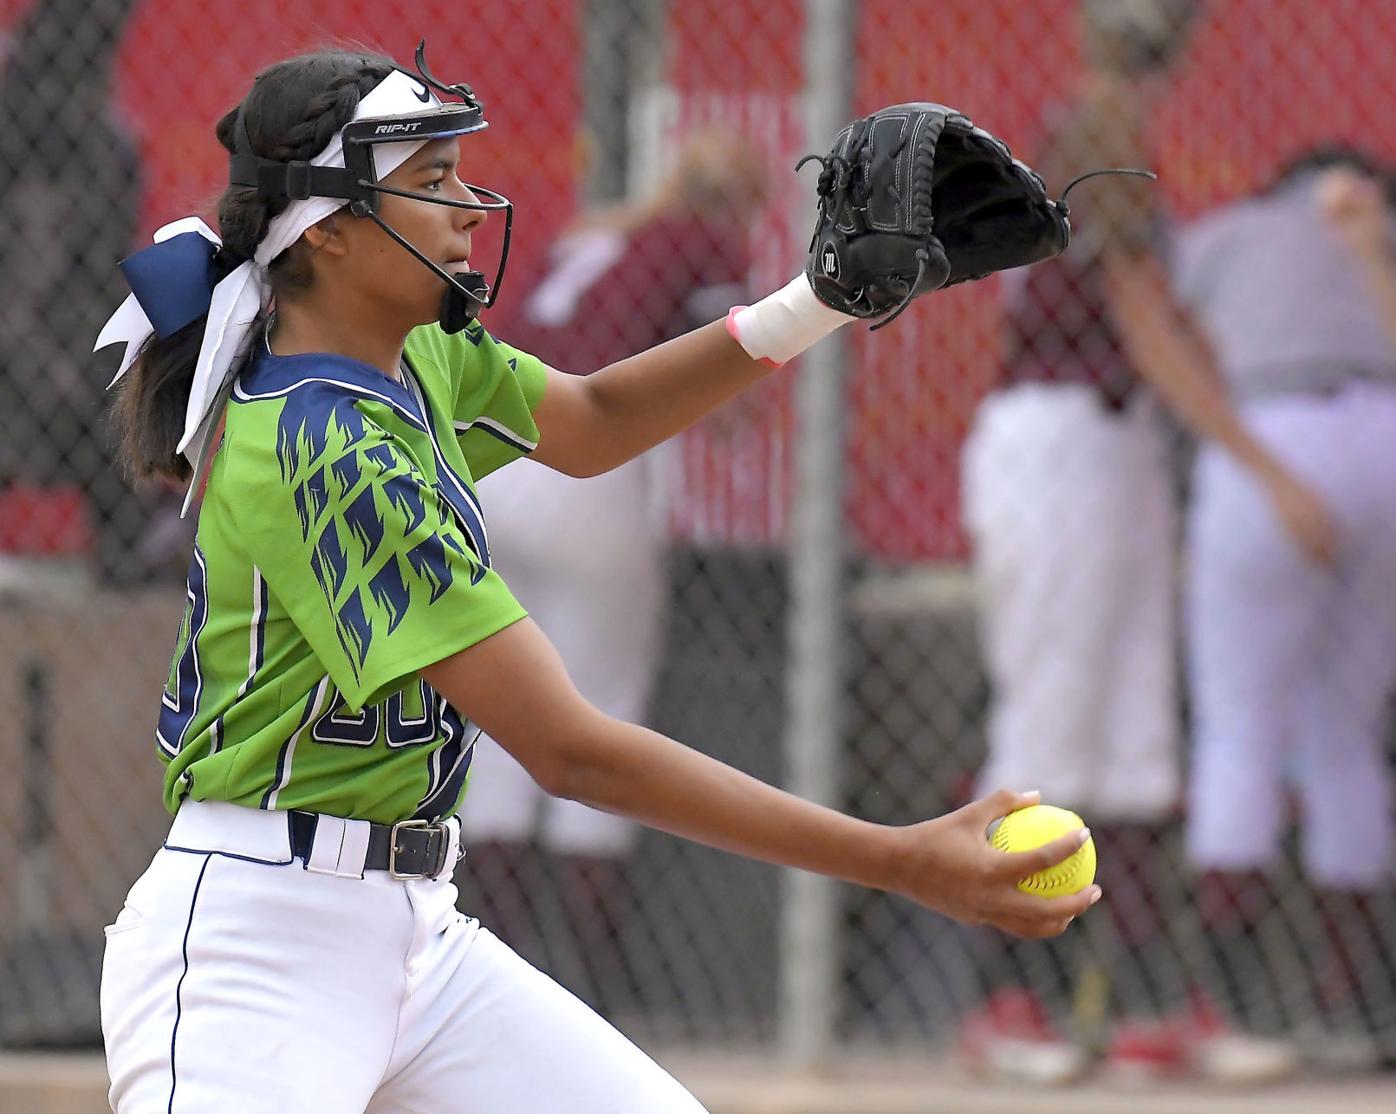 Region 12 softball race could have been compelling, School Sports